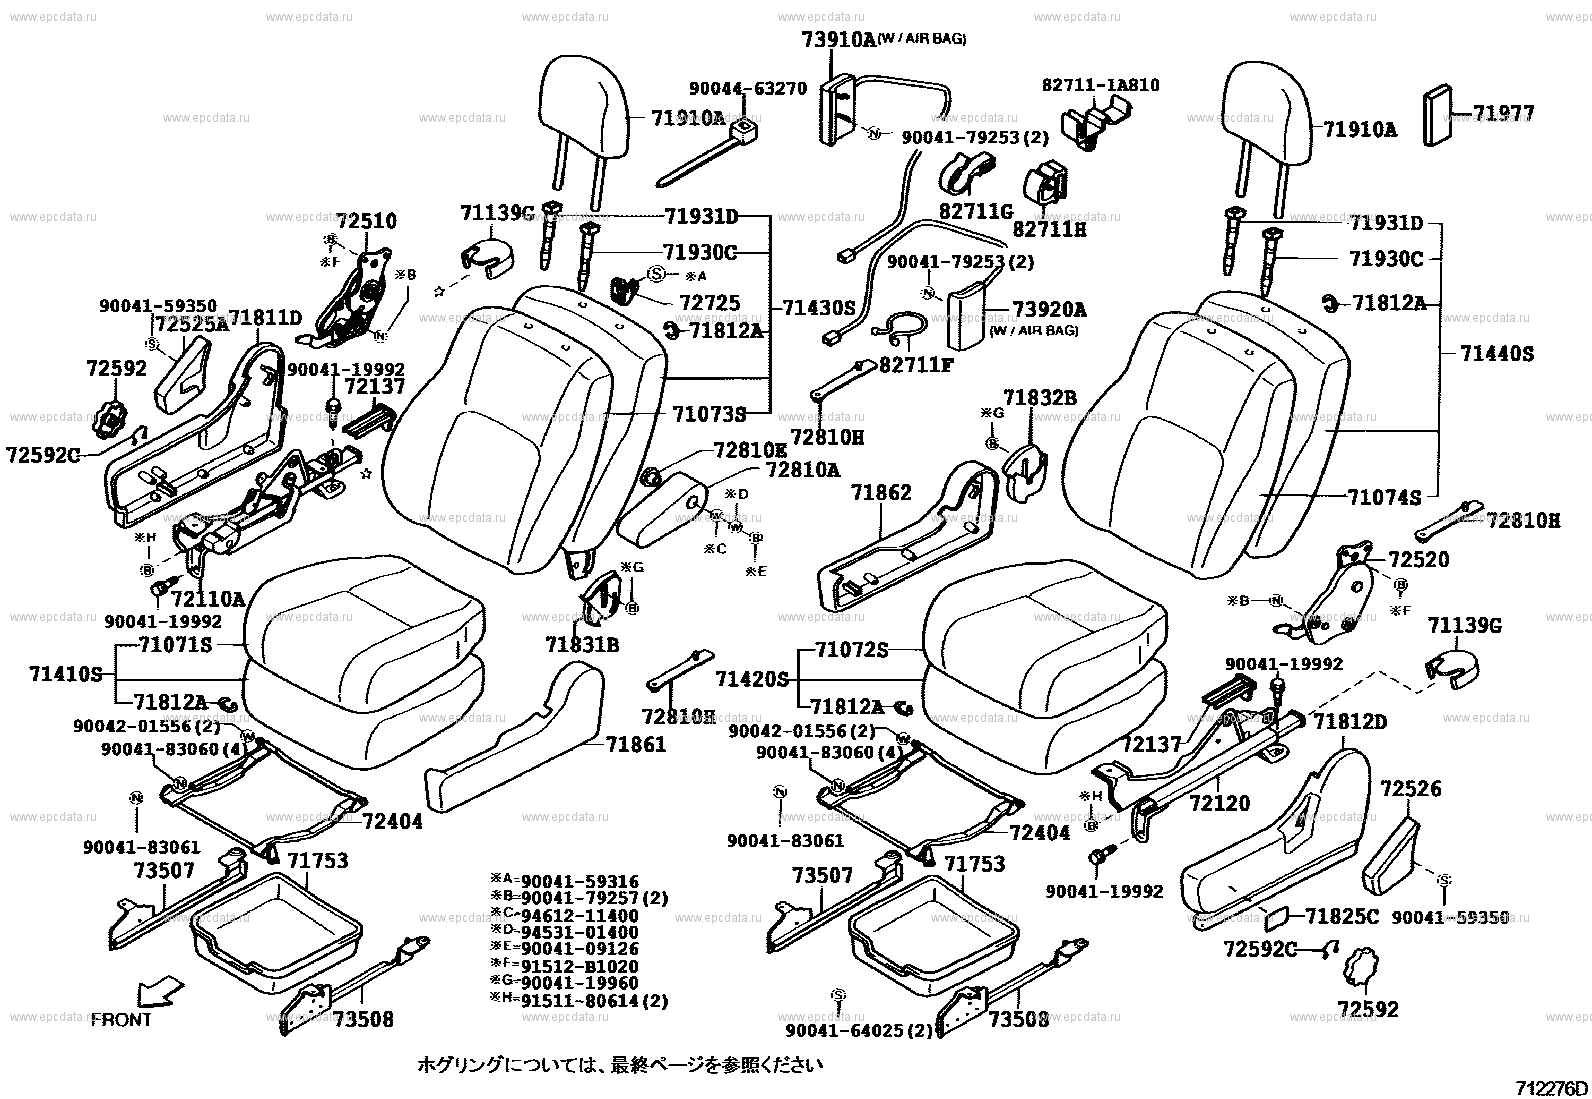 FRONT SEAT & SEAT TRACK